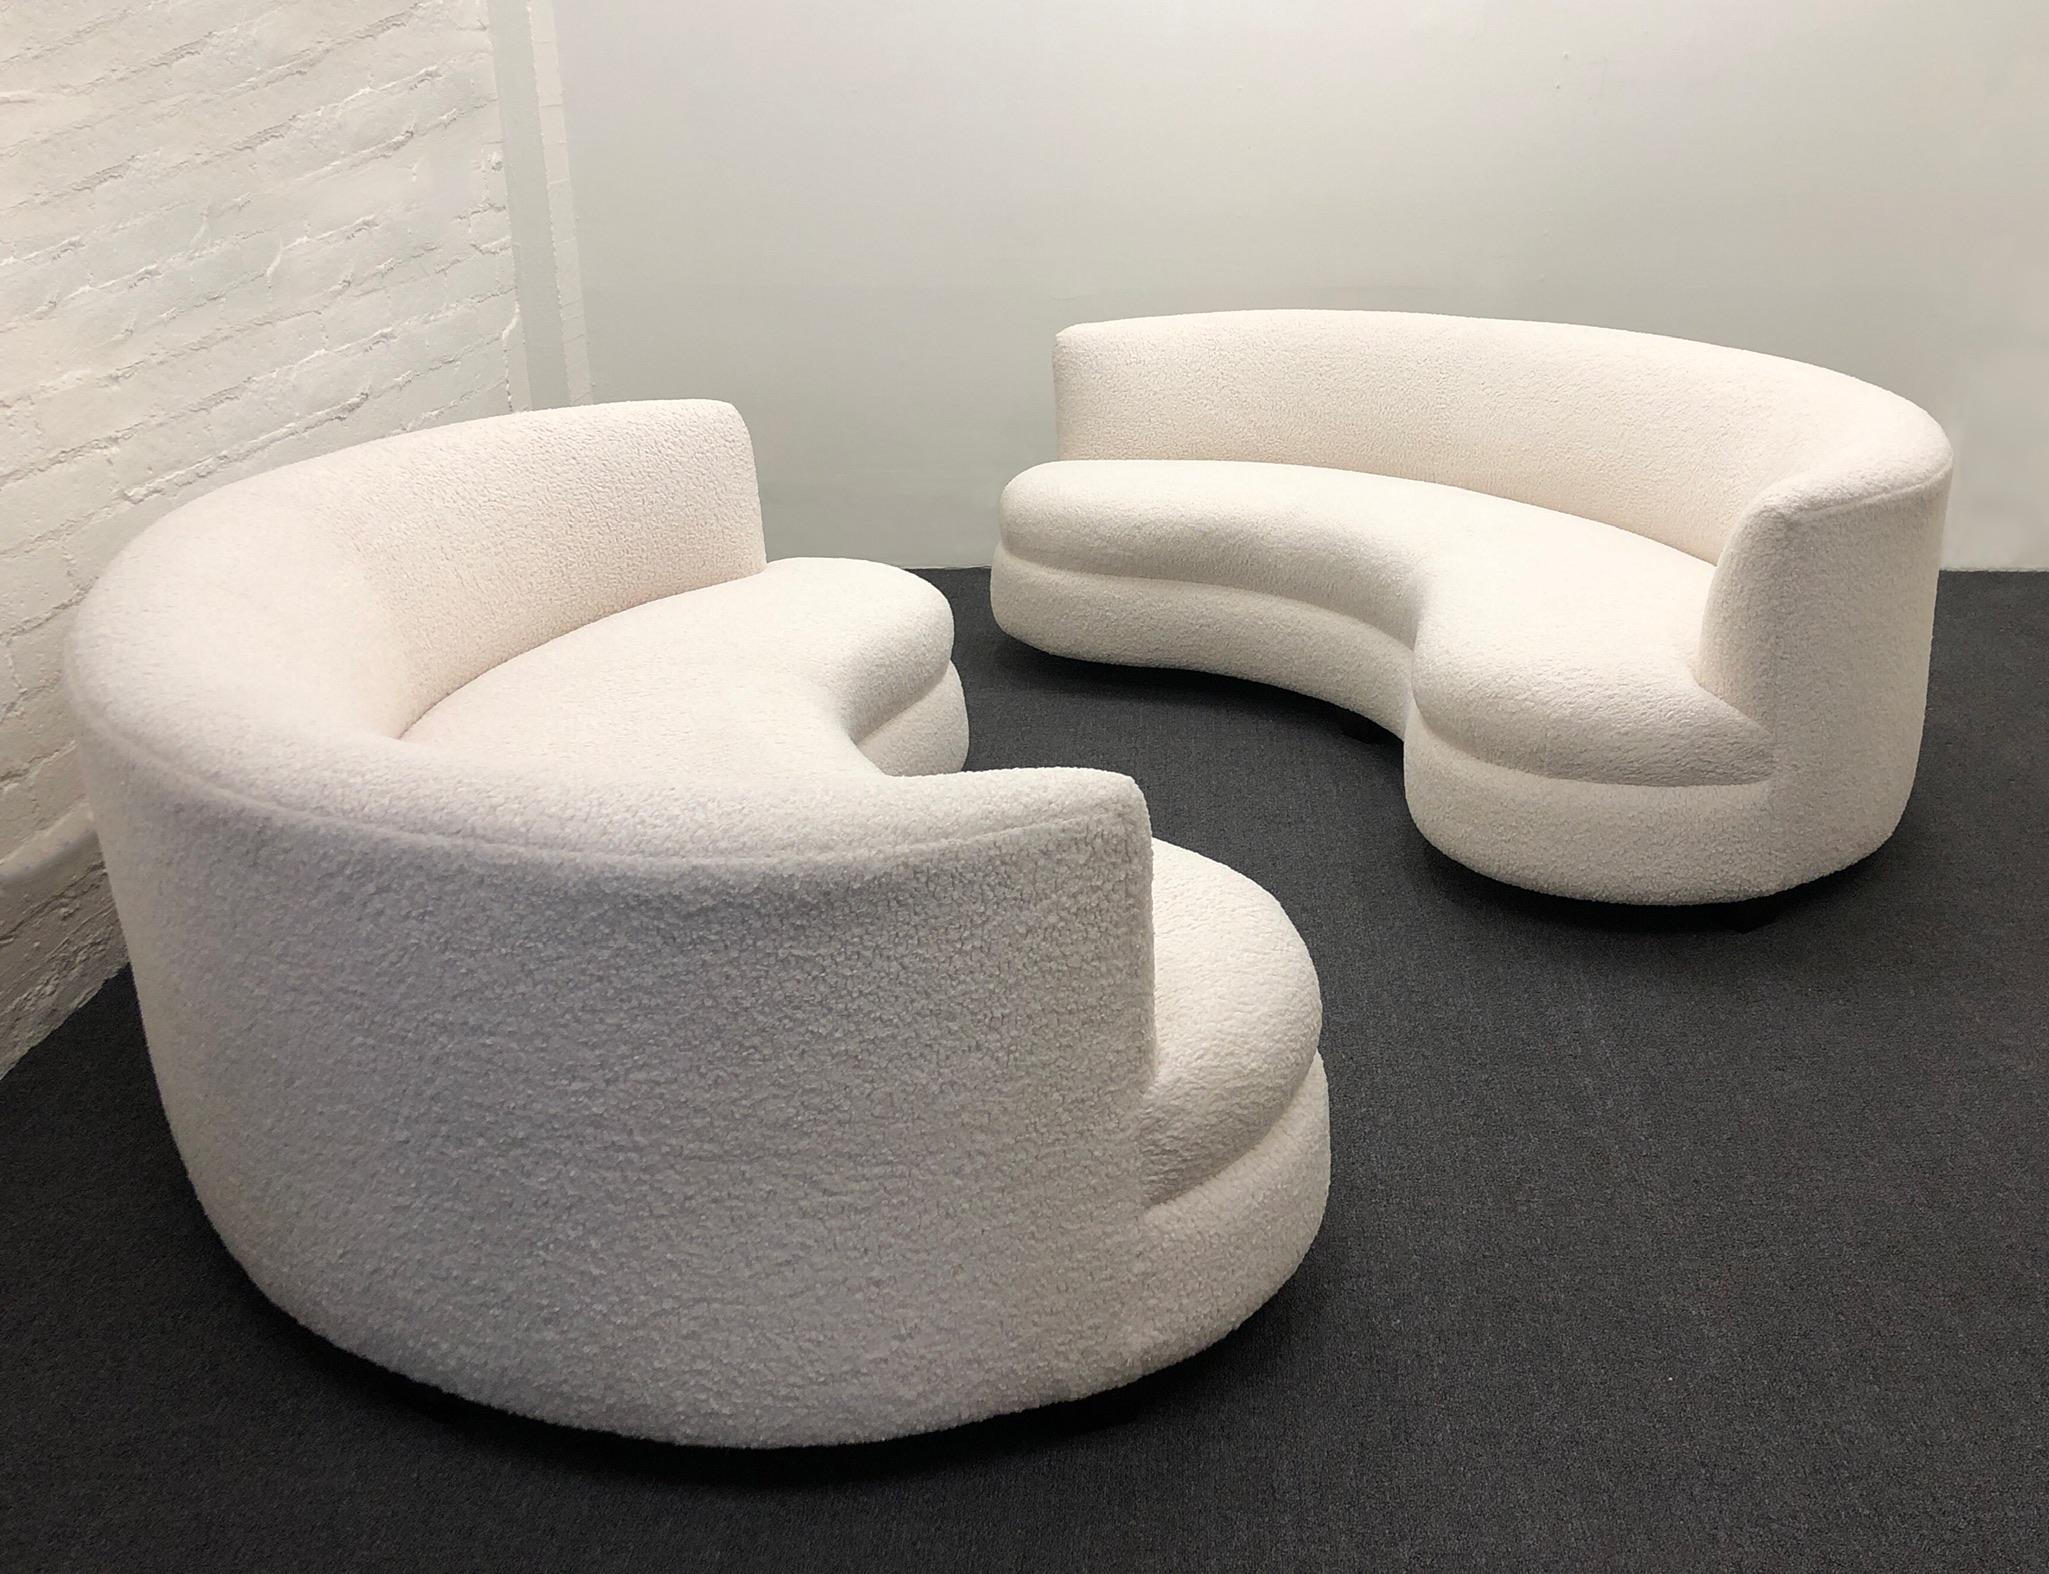 Glamorous pair of 1960’s kidney shaped sofas.
Newly reupholstered in a stunning nubby Boucle fabric.
Measurements: 84” wide, 48” deep, 28.5” high, 17.5” seat, 25” deep seat at center.